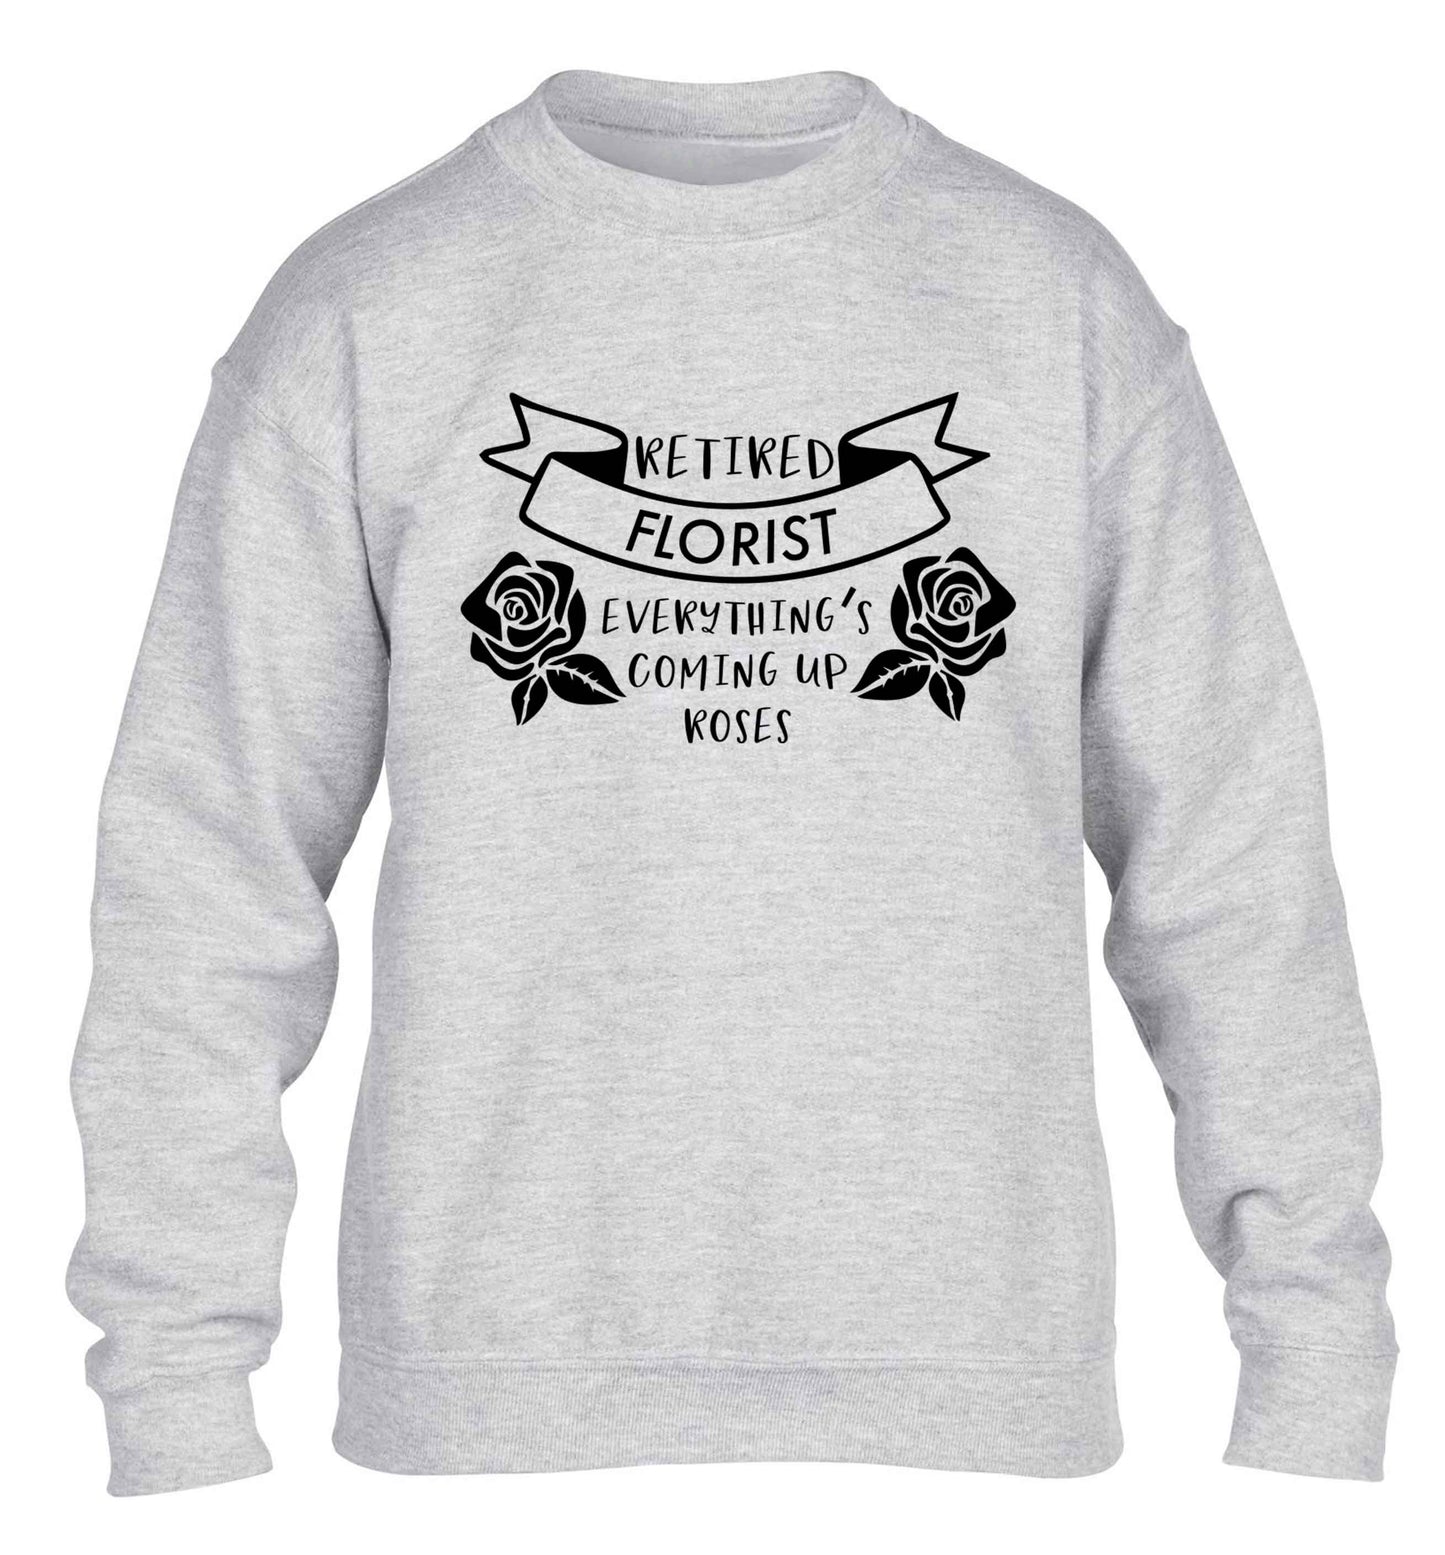 Retired florist everything's coming up roses children's grey sweater 12-13 Years